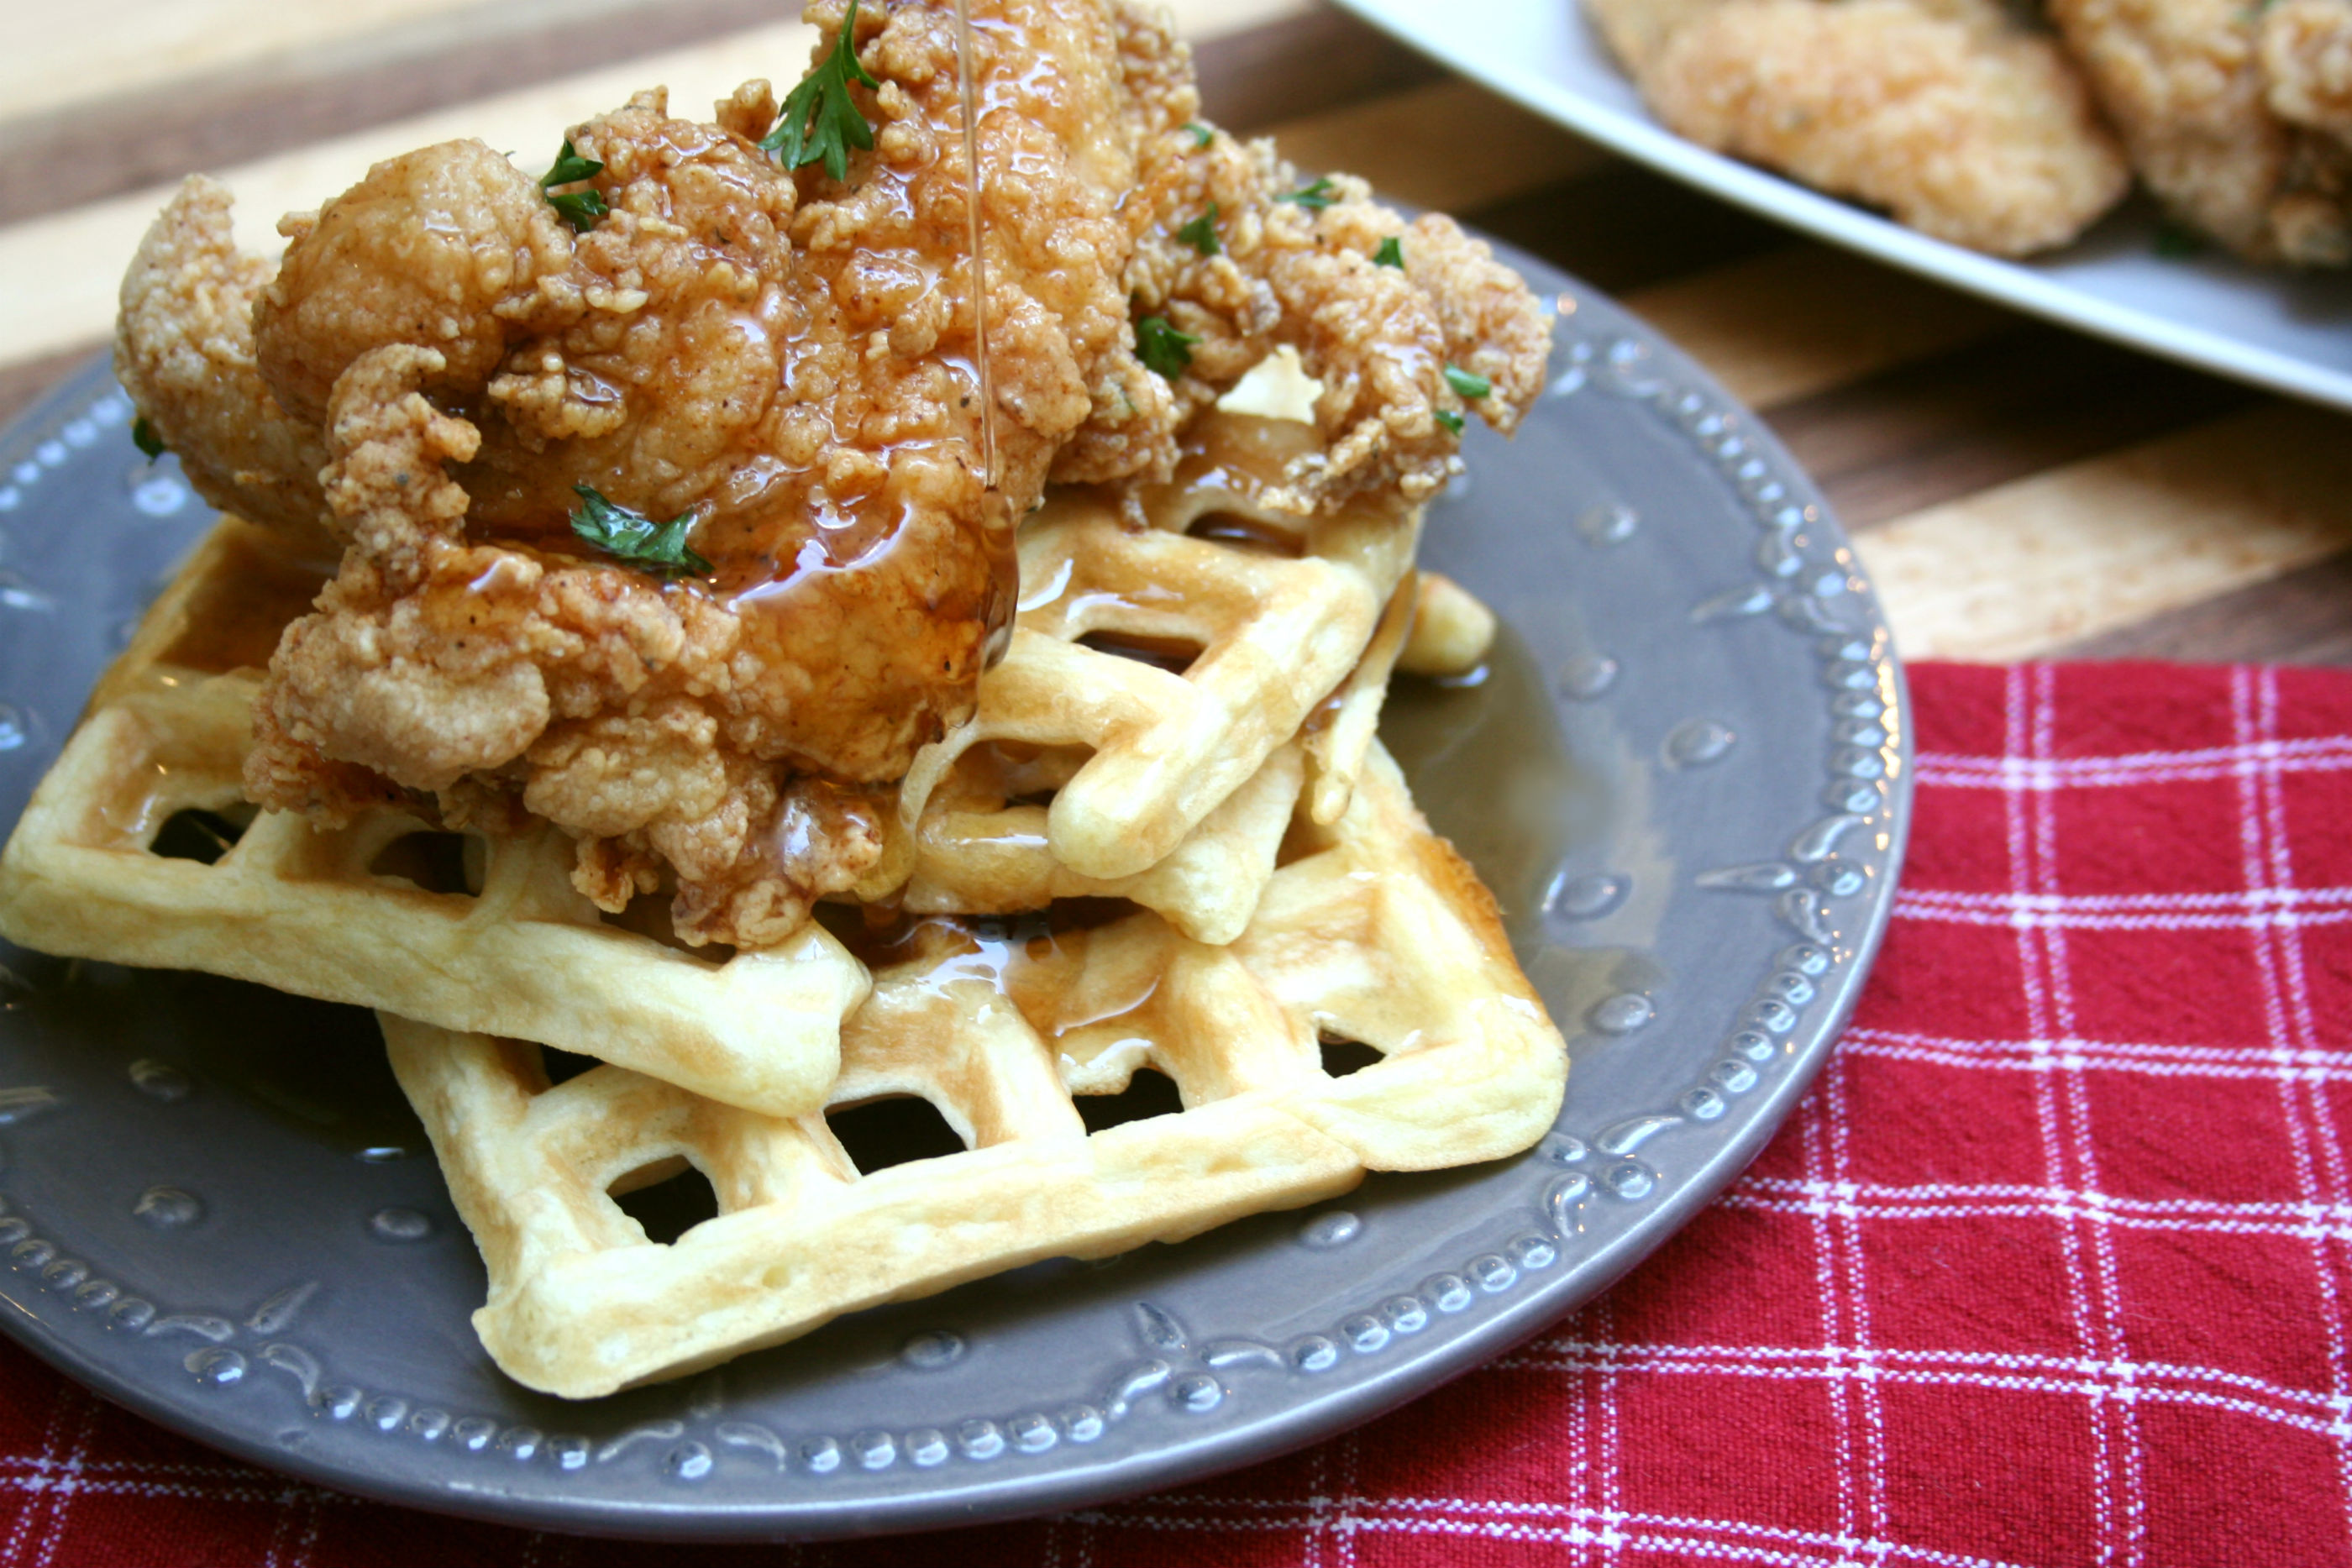 Spiced Chicken And Waffles Dash Of Savory Cook With Passion